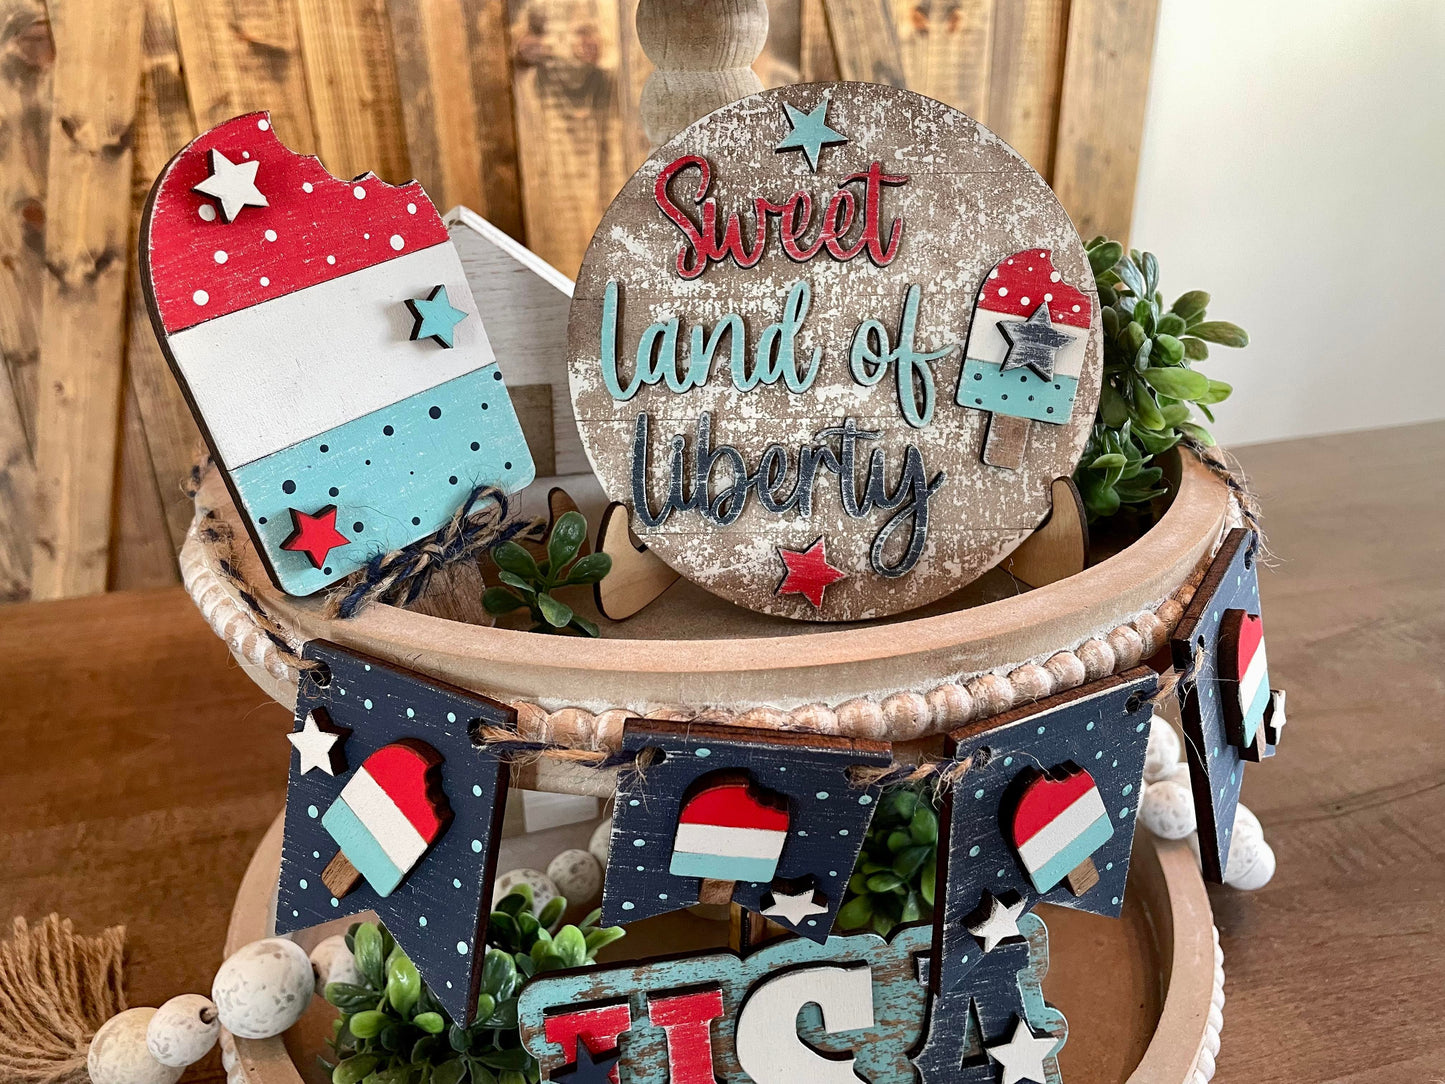 3D Tiered Tray Decor - Sweet Land of Liberty